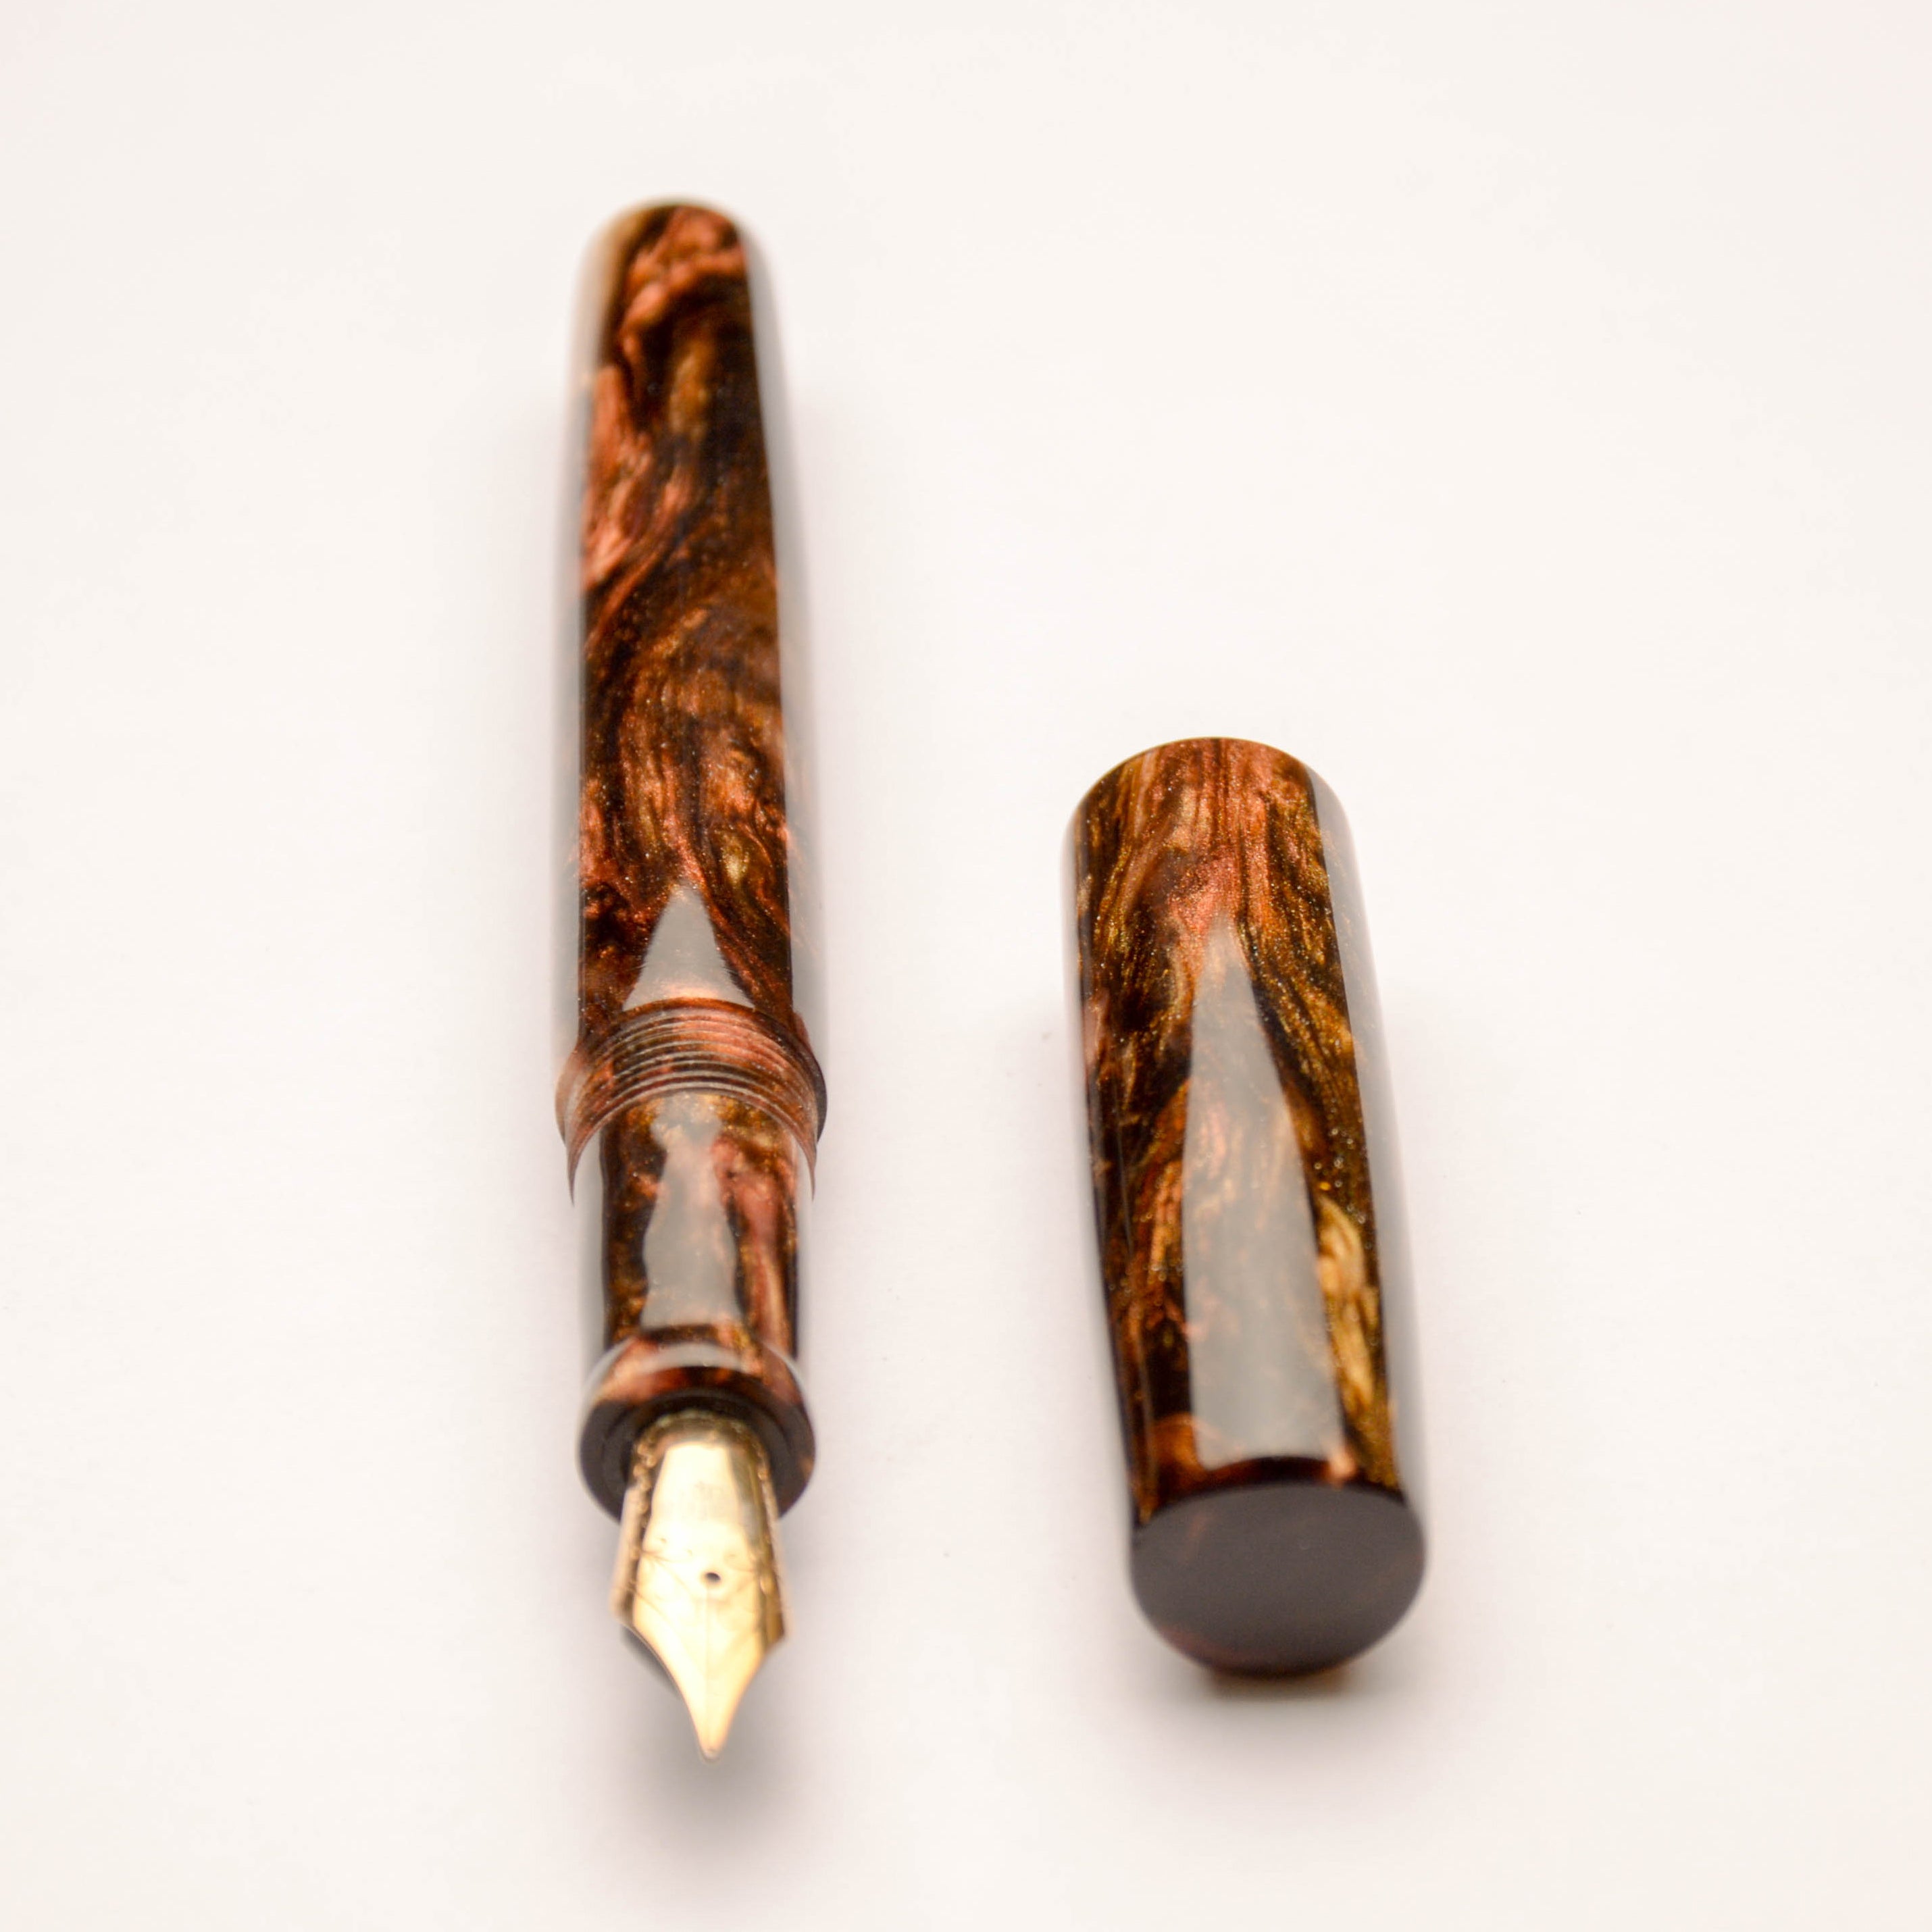 Fountain Pen - JoWo #6 - 13 mm - In-house material with brown, gold, copper and rose gold